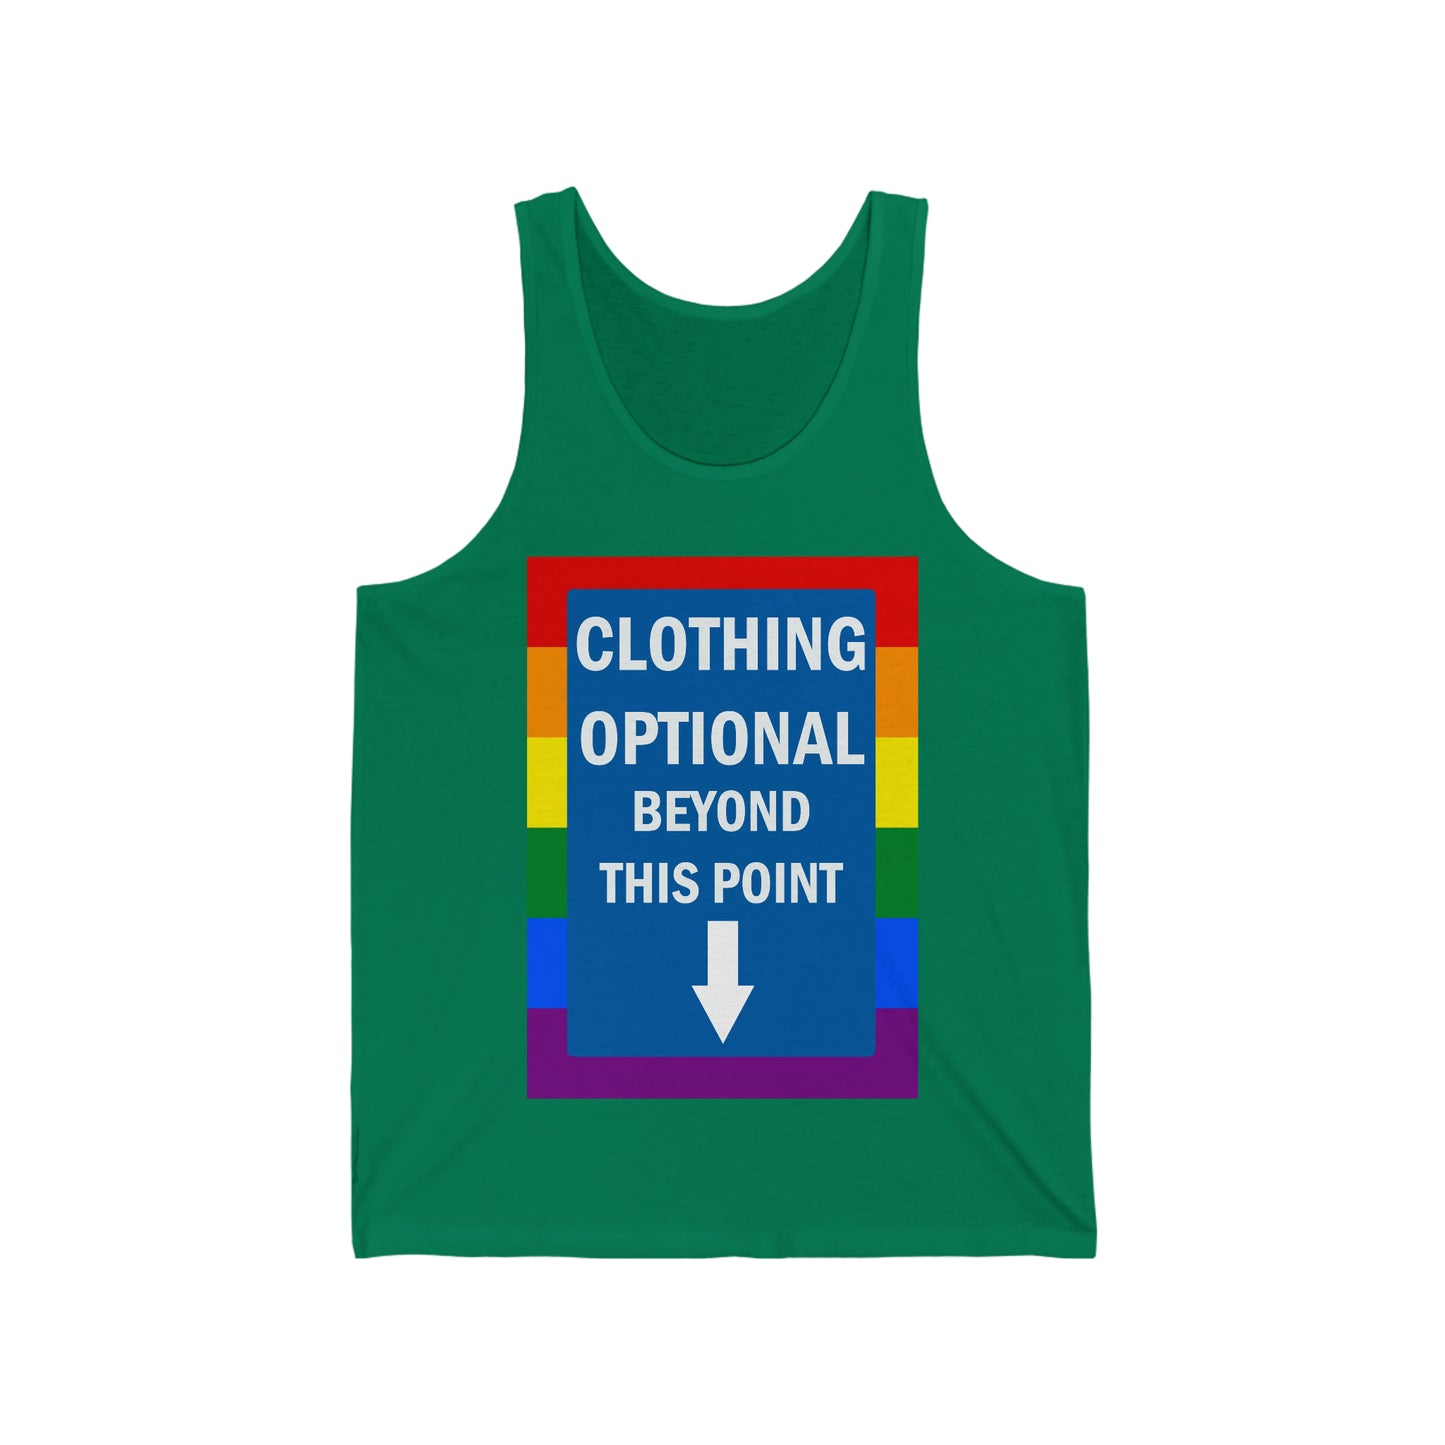 Clothing Optional Beyond this Point Gay Adult Unisex Tank Top